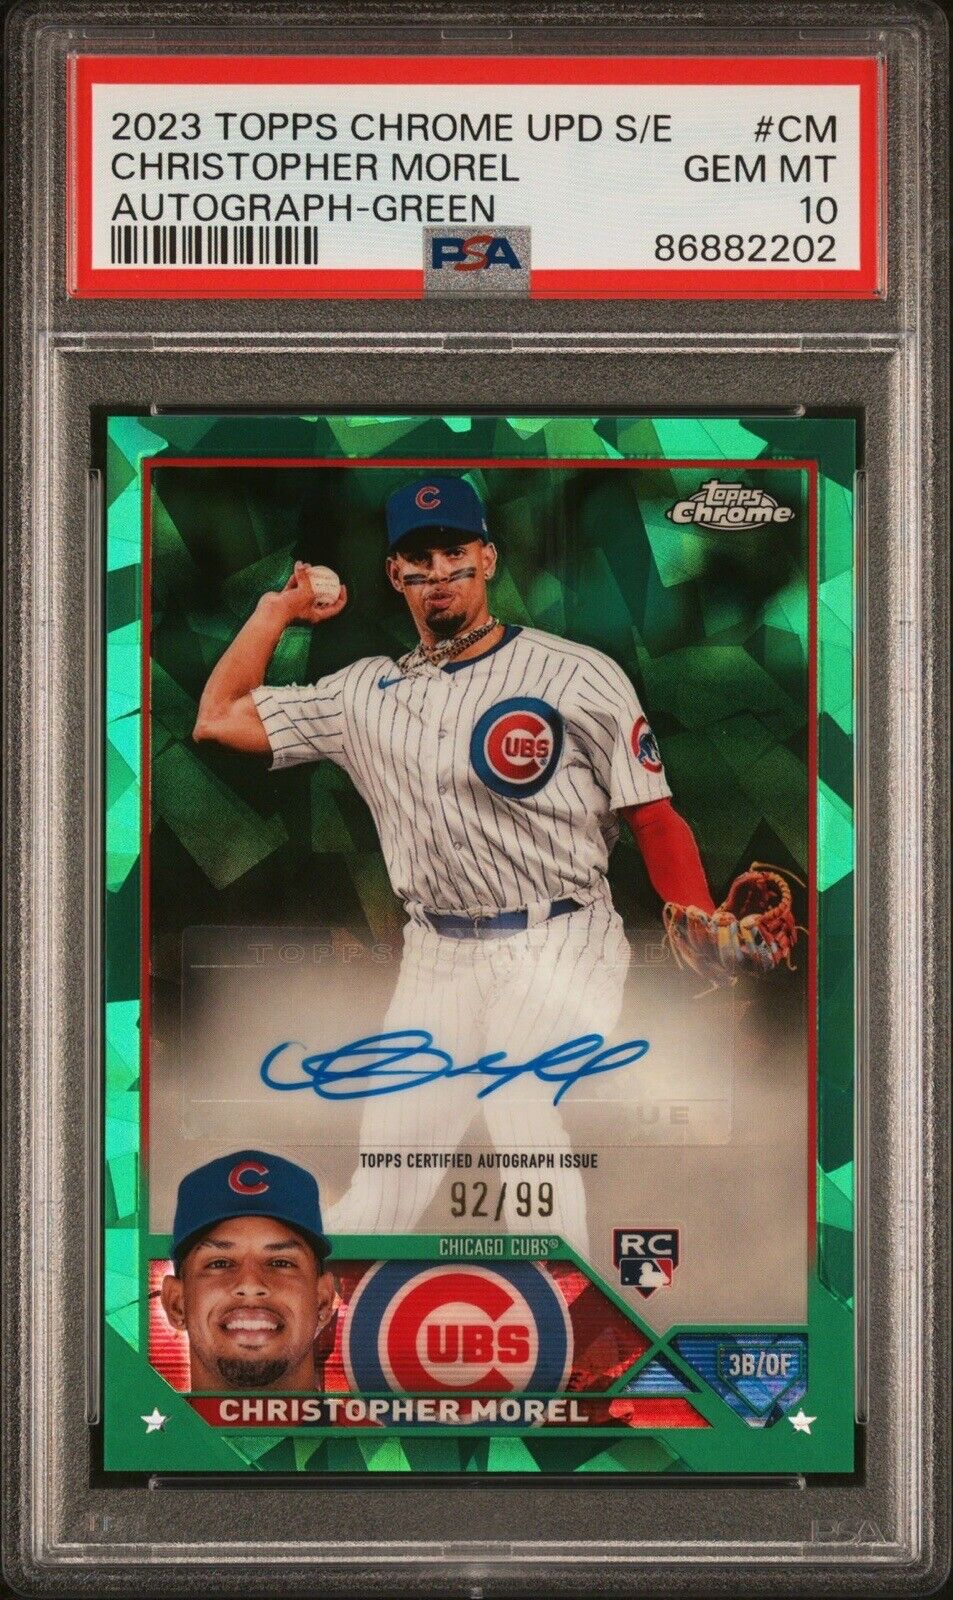 2023 Topps Chrome Update Sapphire Christopher Morel Rookie Green Auto /99 PSA 10